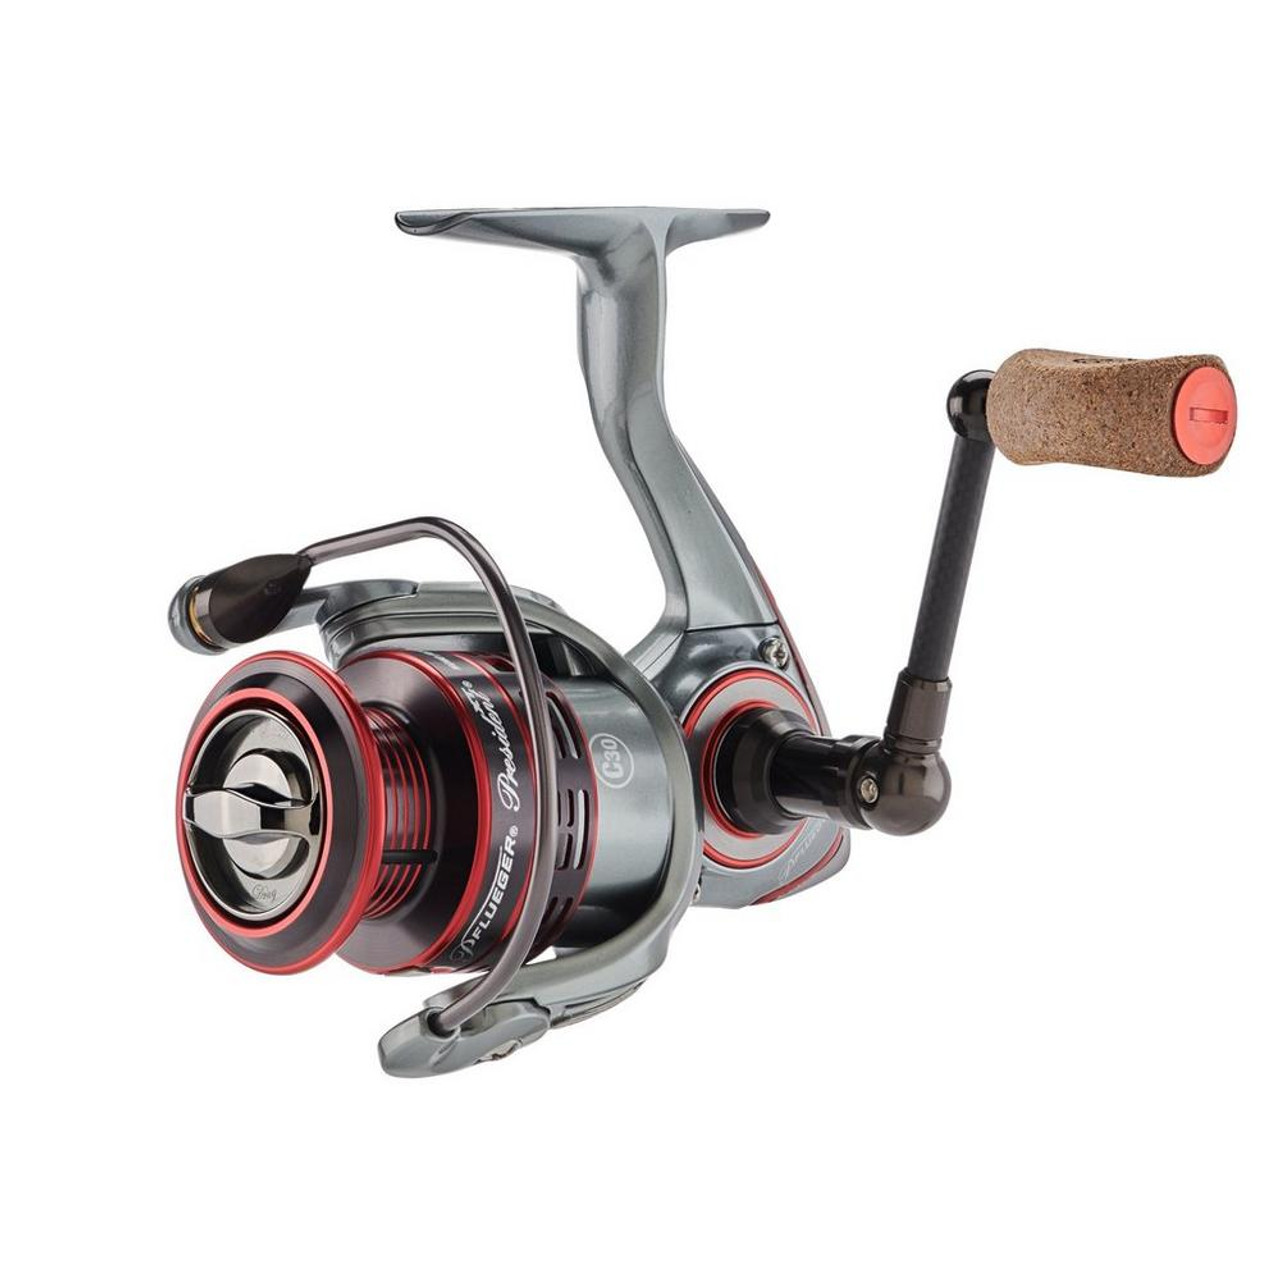 Pflueger President Spinning Reel and Fishing Rod Combo (Size 20